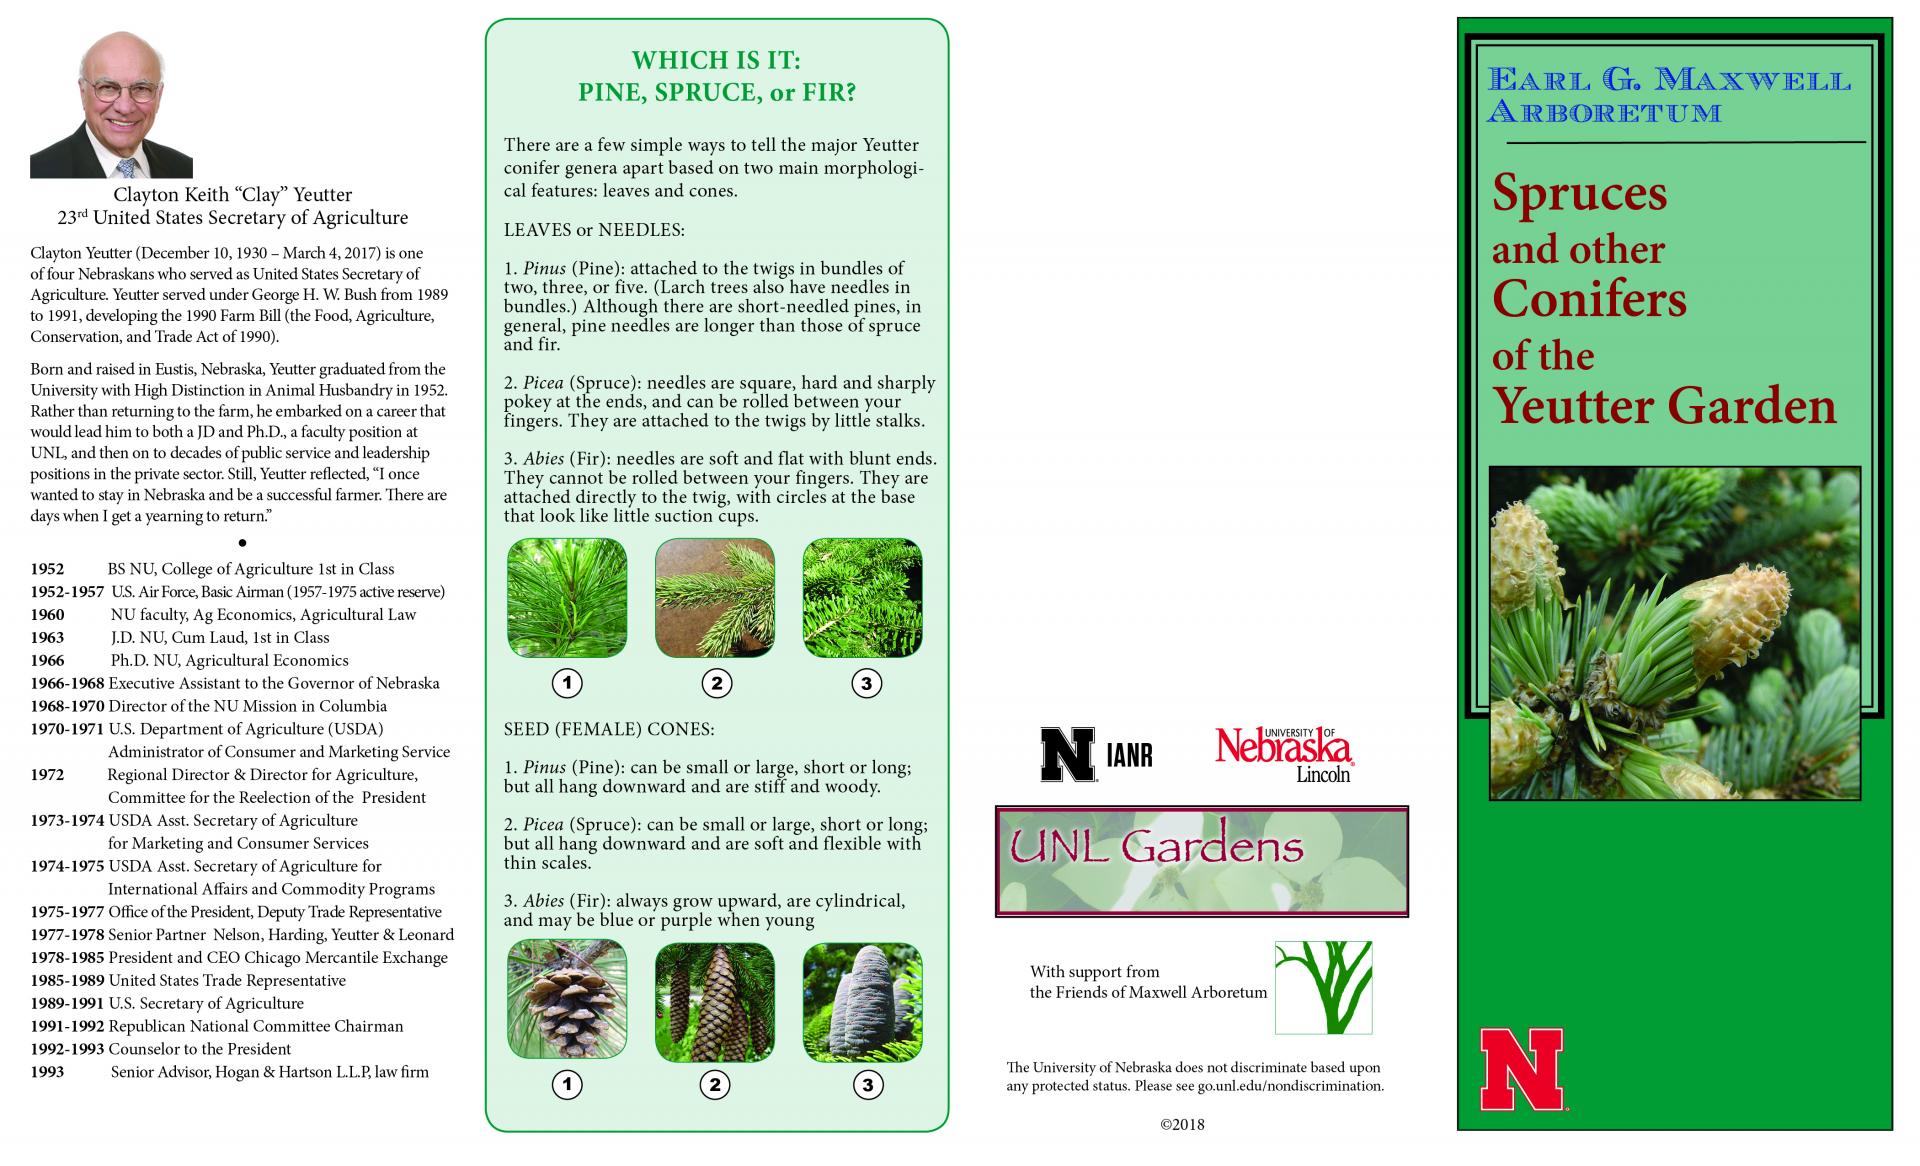 Yeutter Conifer brochure page 1